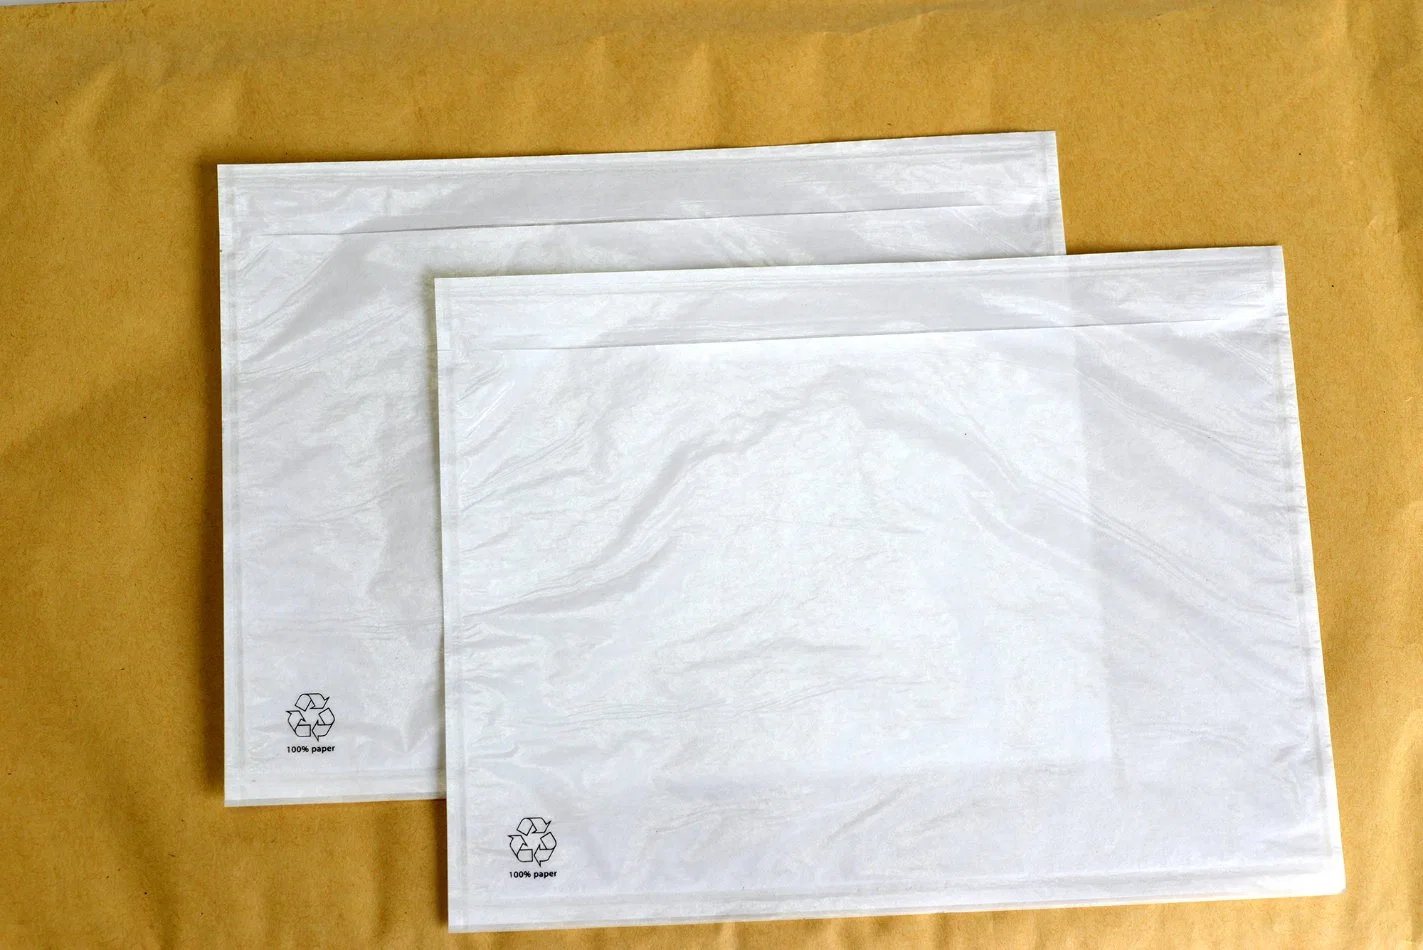 Manufacturer Self-Adhesive 100% Recycled Paper Clear Packing List Envelope Document Envelope Pouch